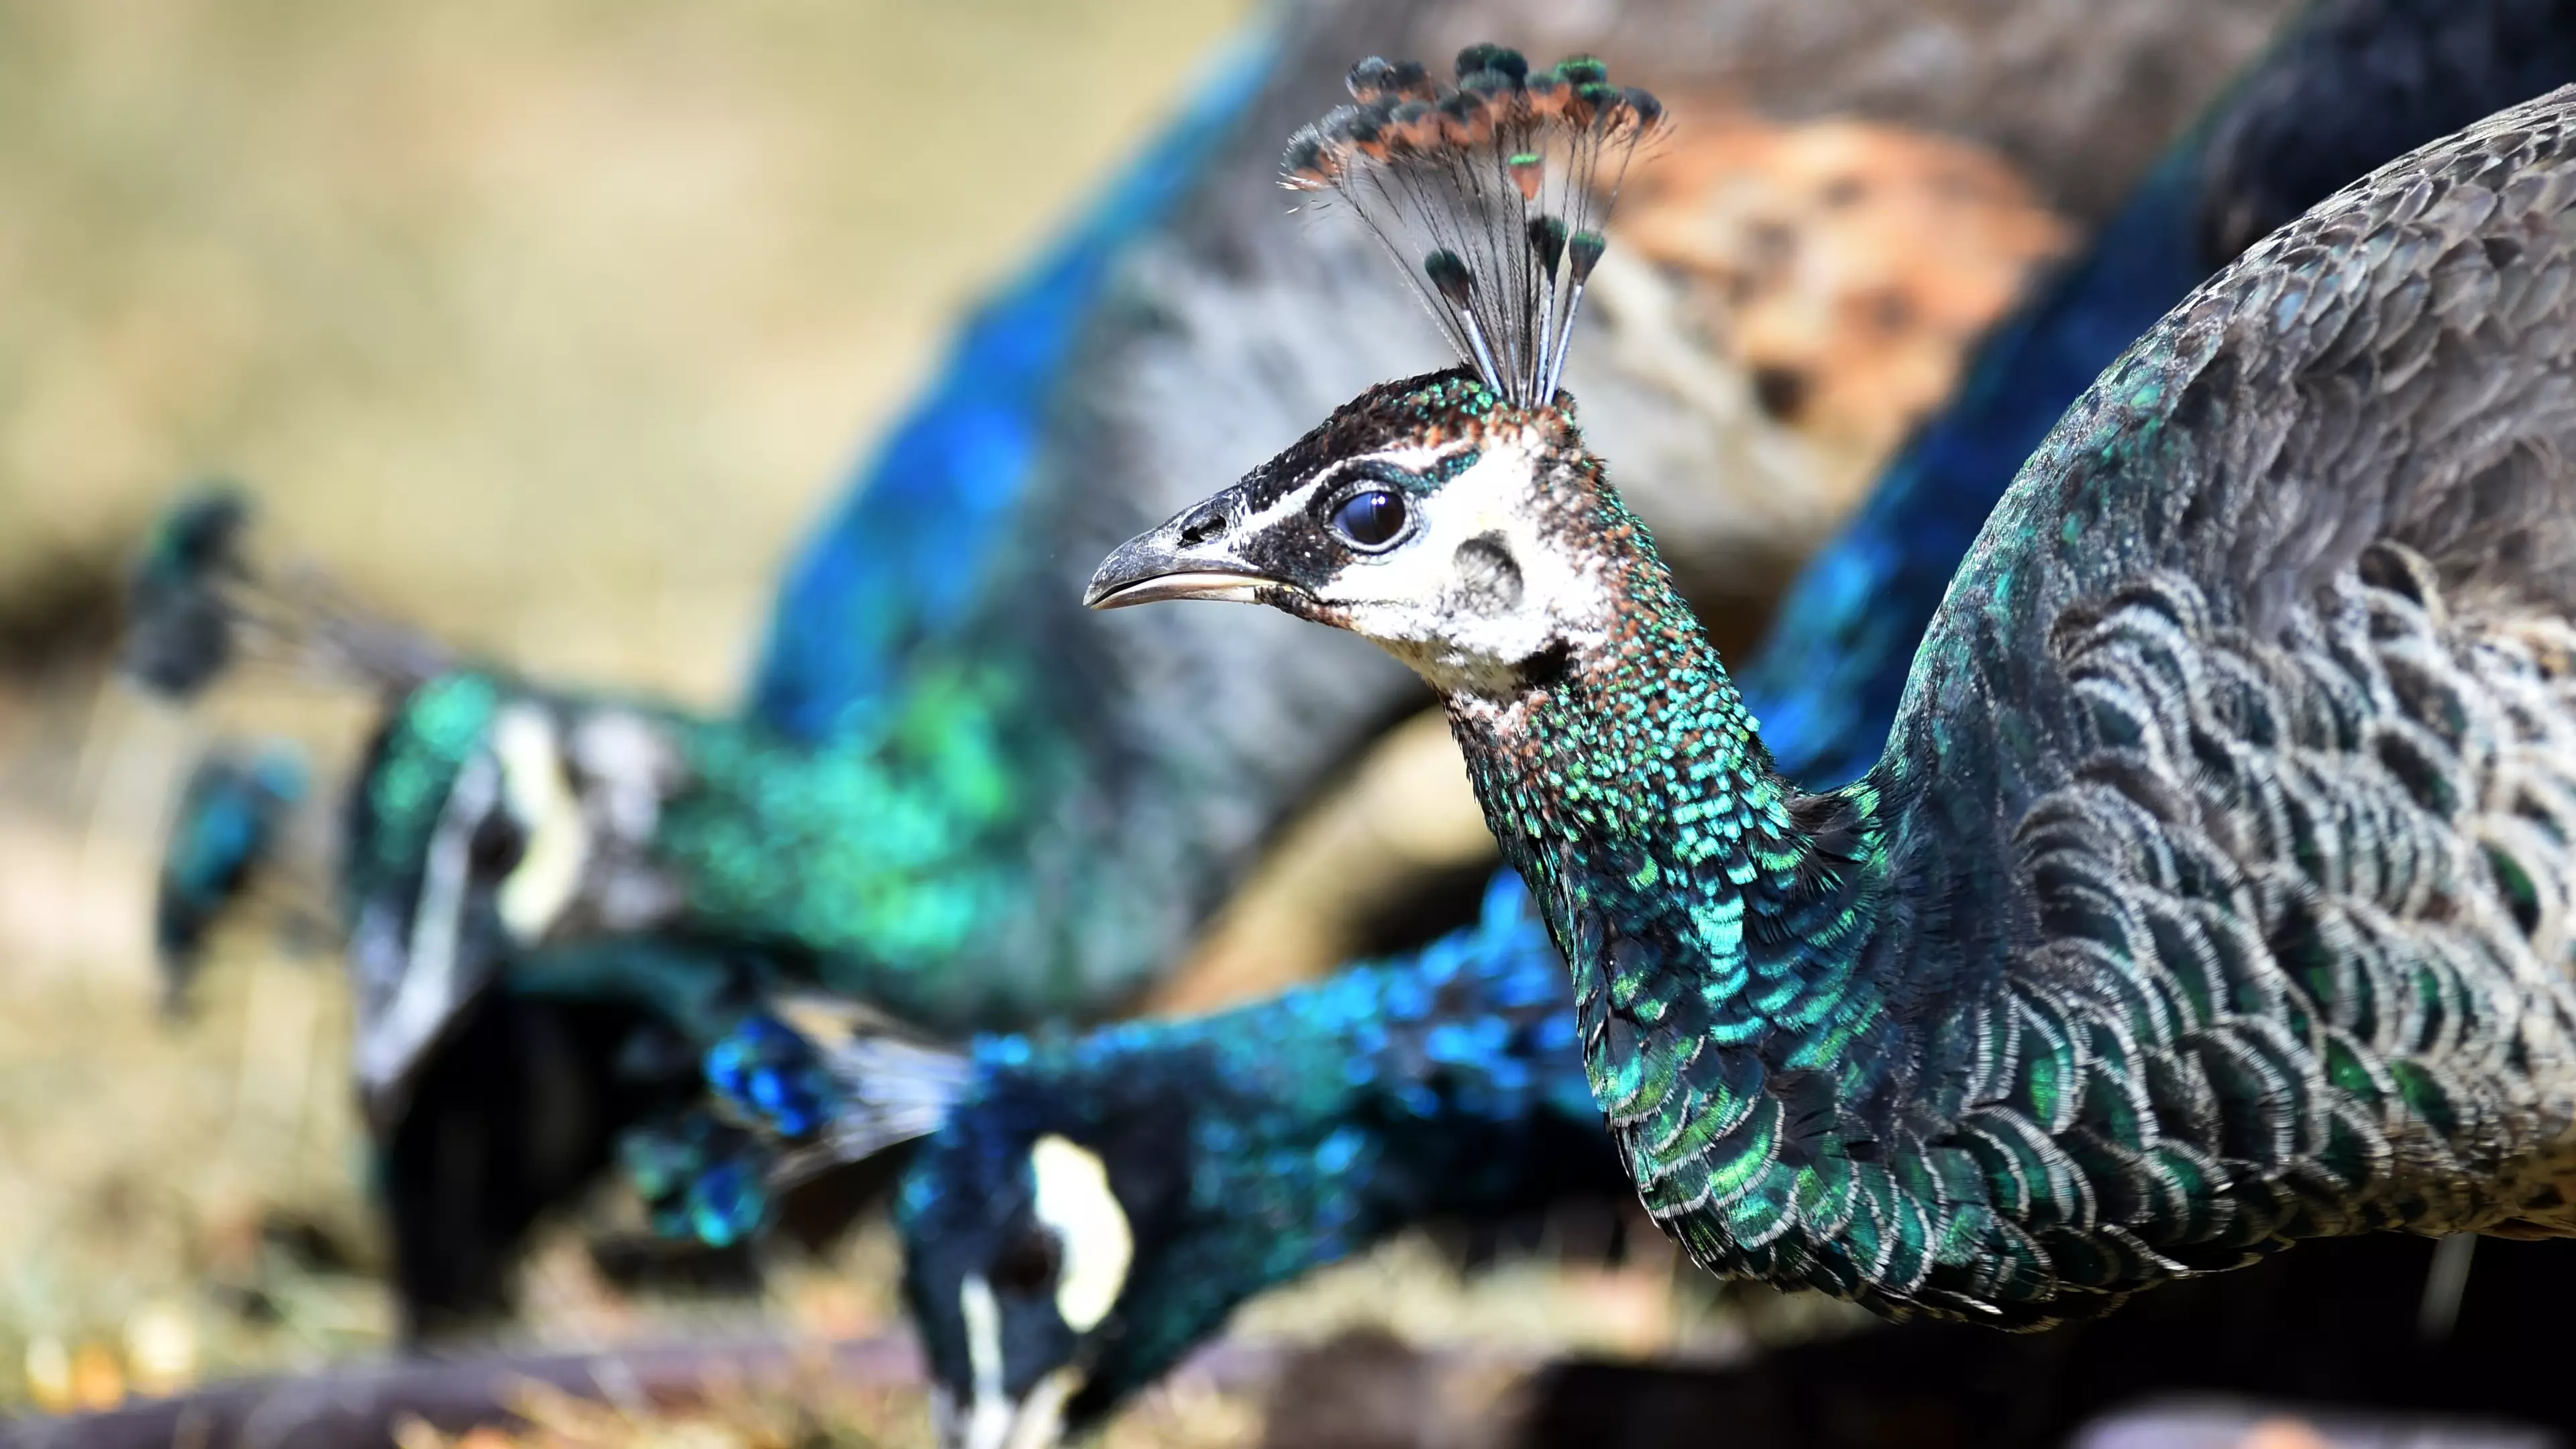 A Support Peacock Was Denied An Airline Seat And People Are Confused